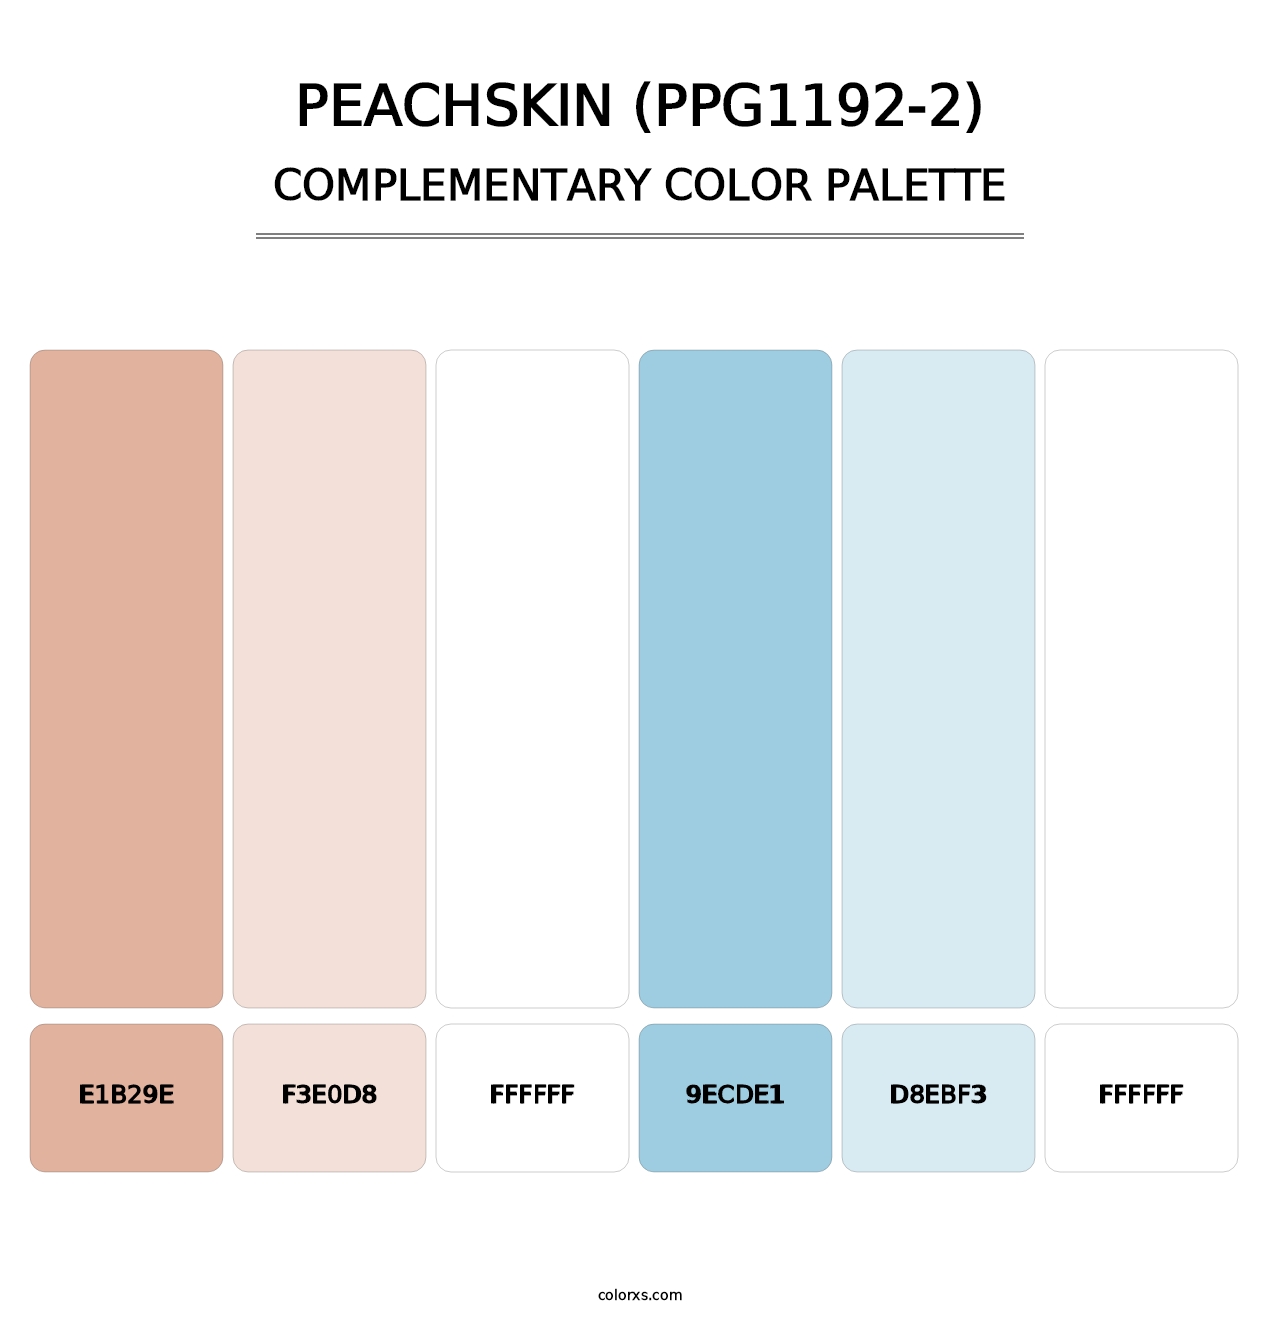 Peachskin (PPG1192-2) - Complementary Color Palette